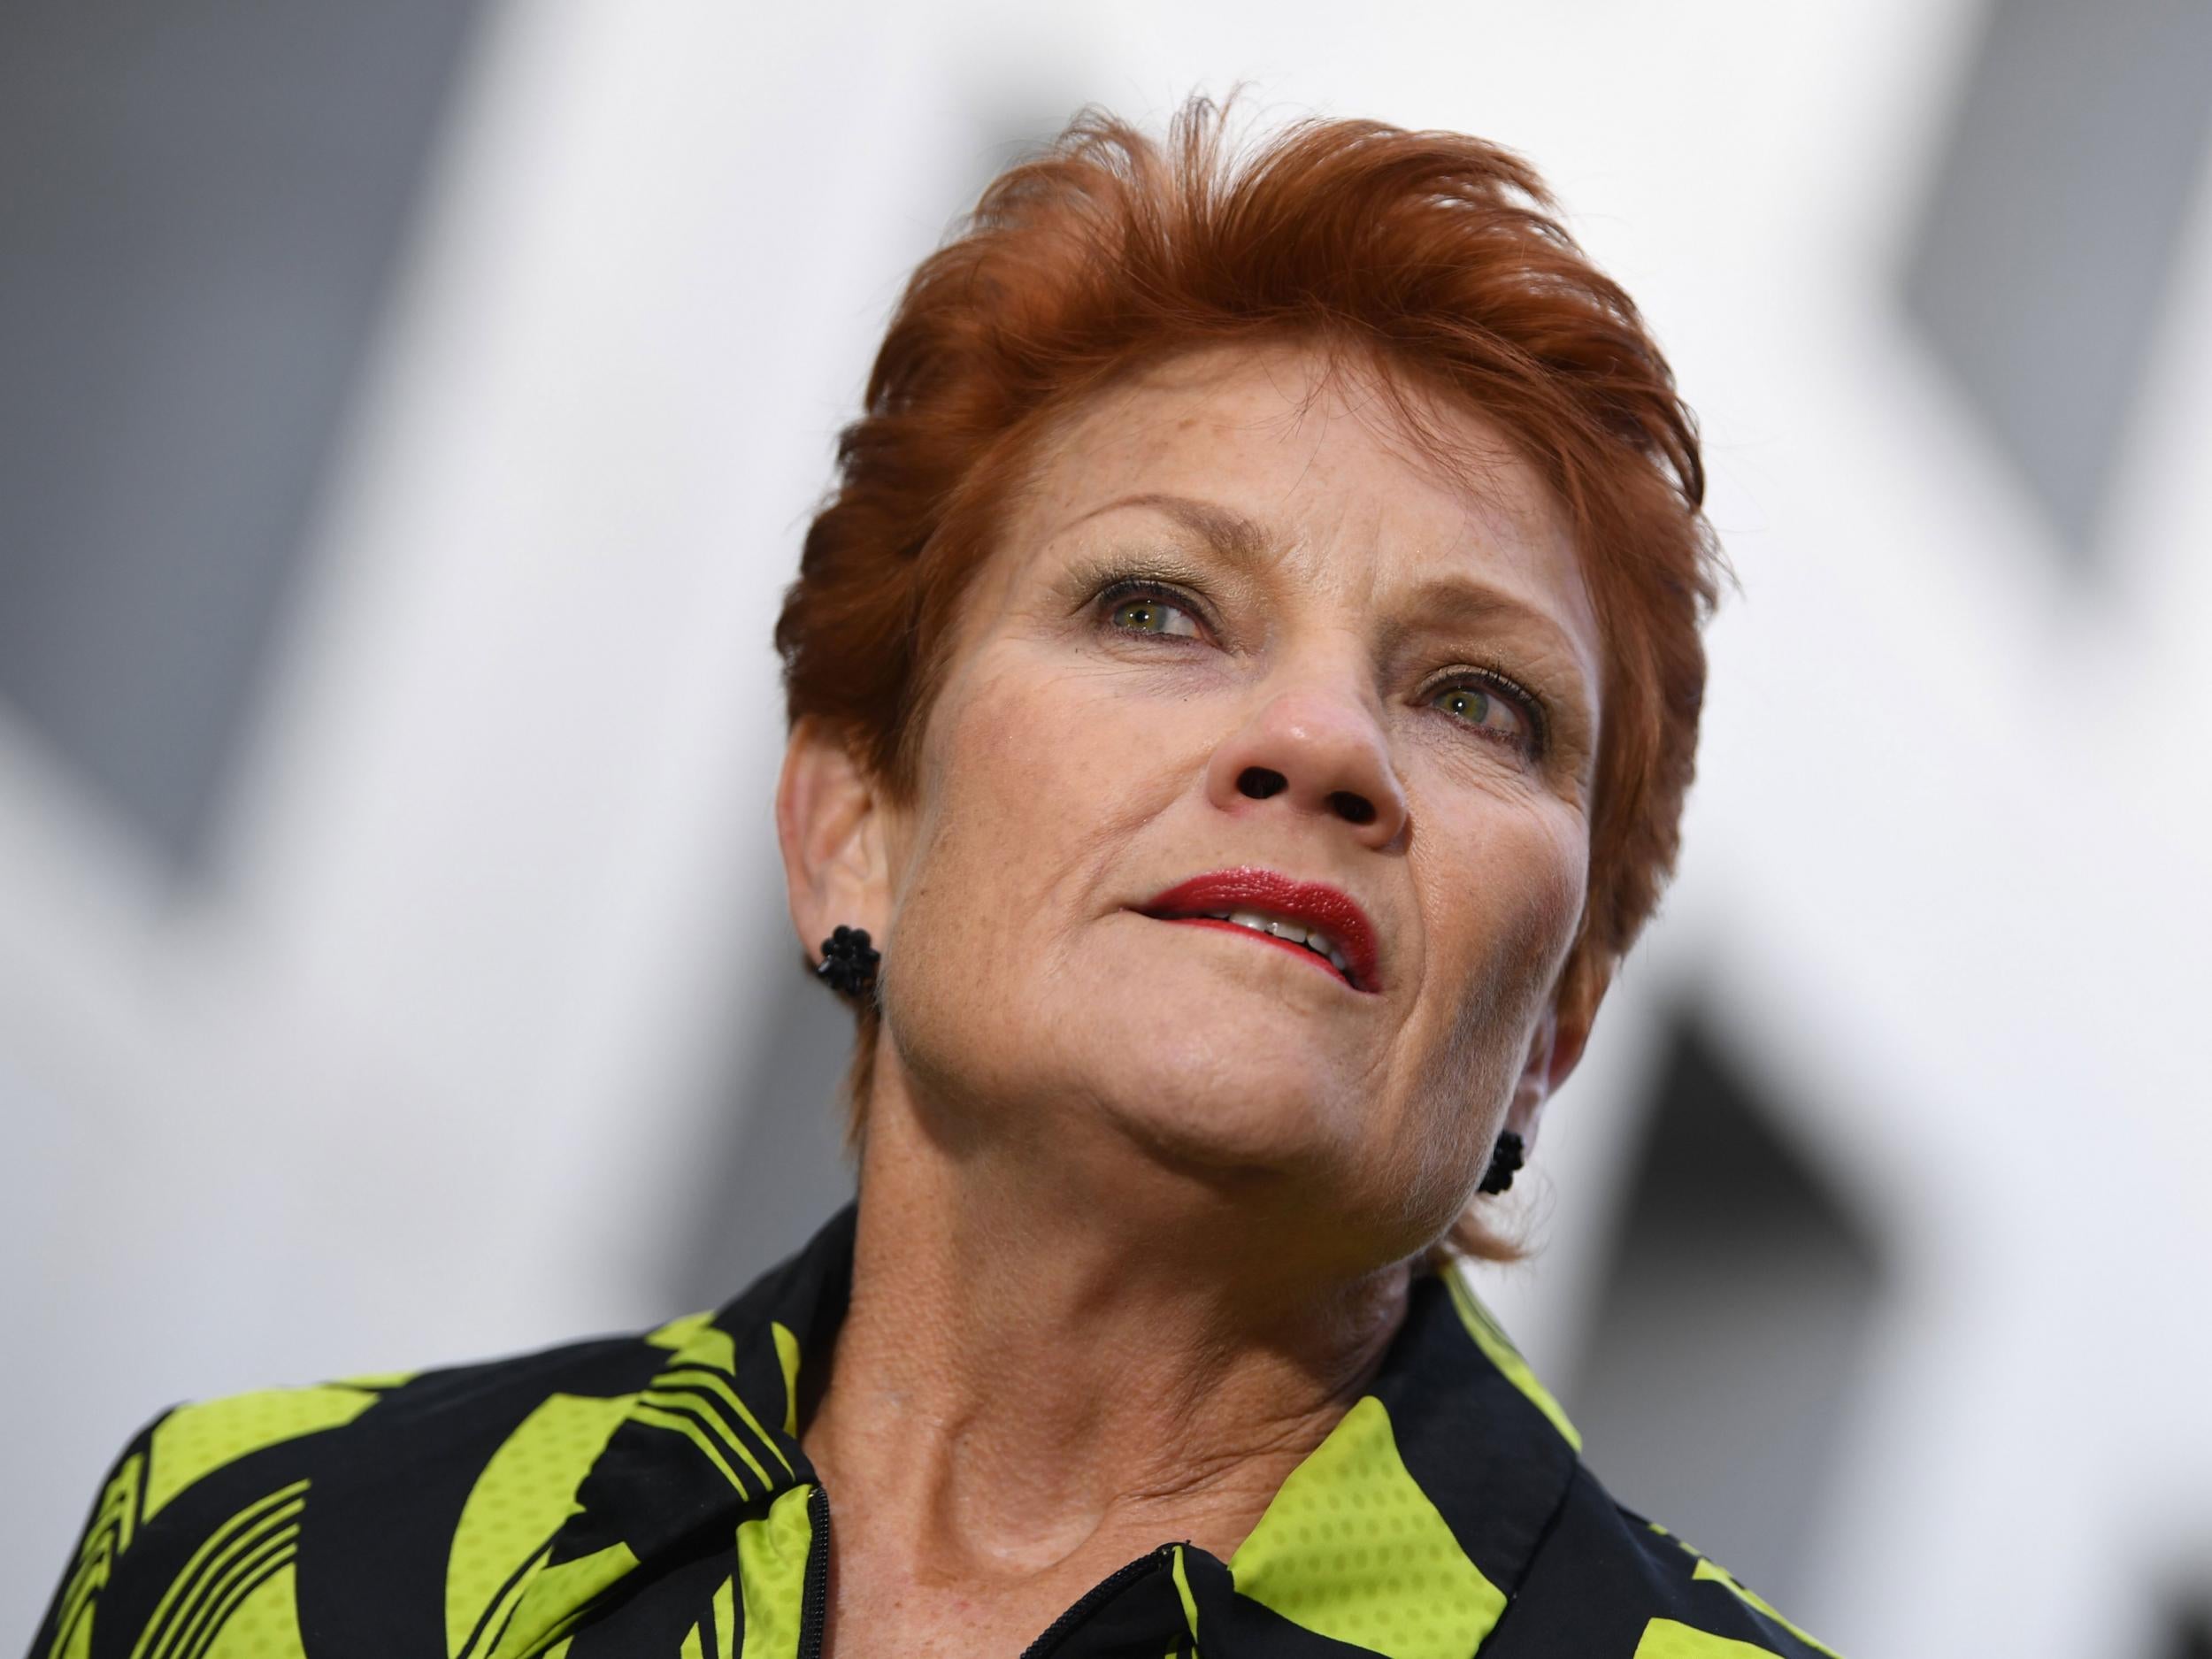 One Nation Leader Senator Pauline Hanson previously called for boycotts of halal-friendly foods